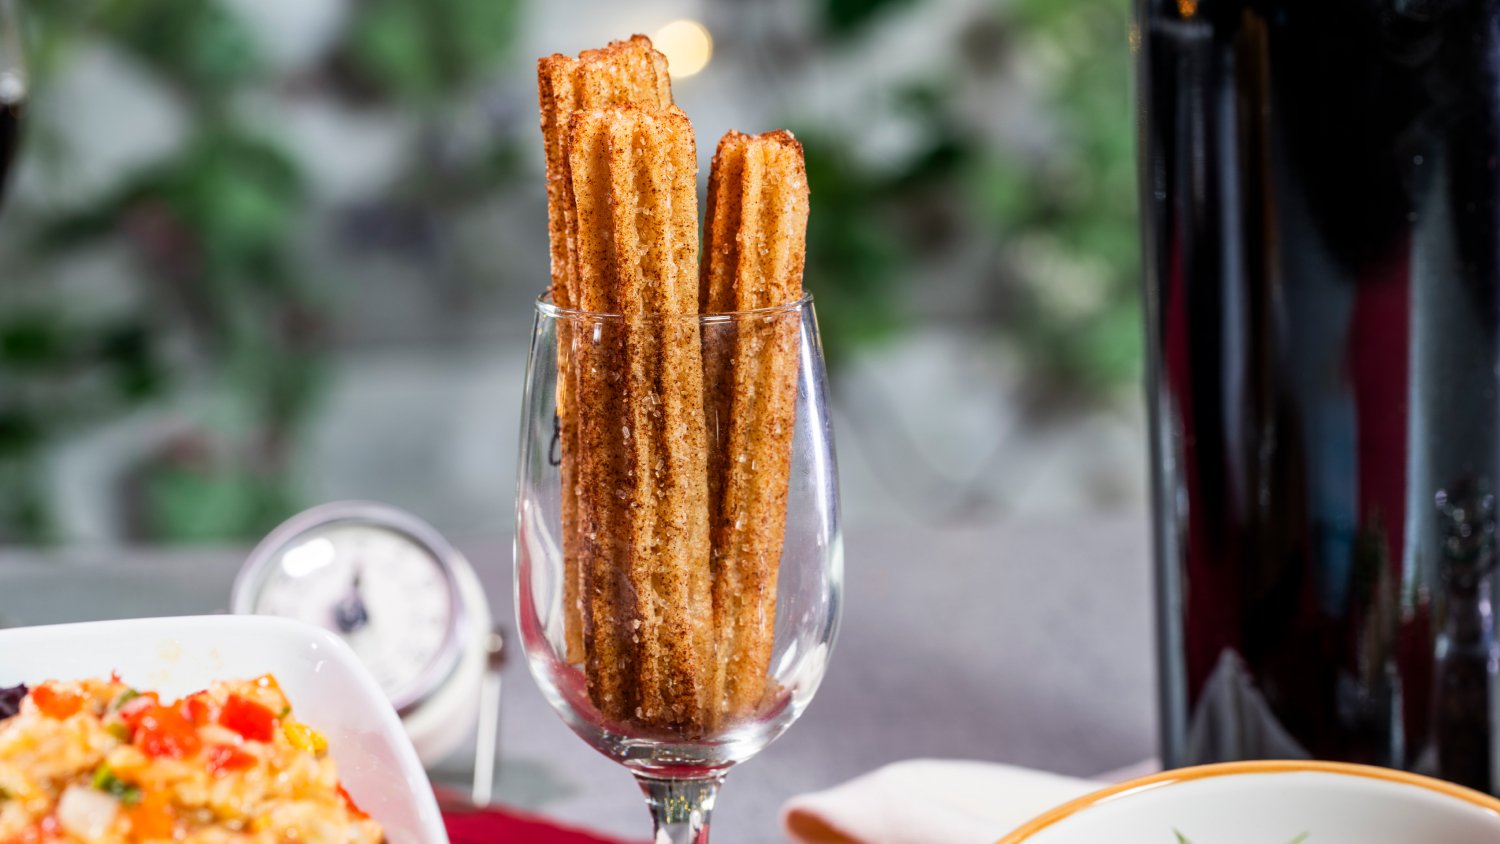 Busch Gardens Tampa Bay Food and Wine Churros